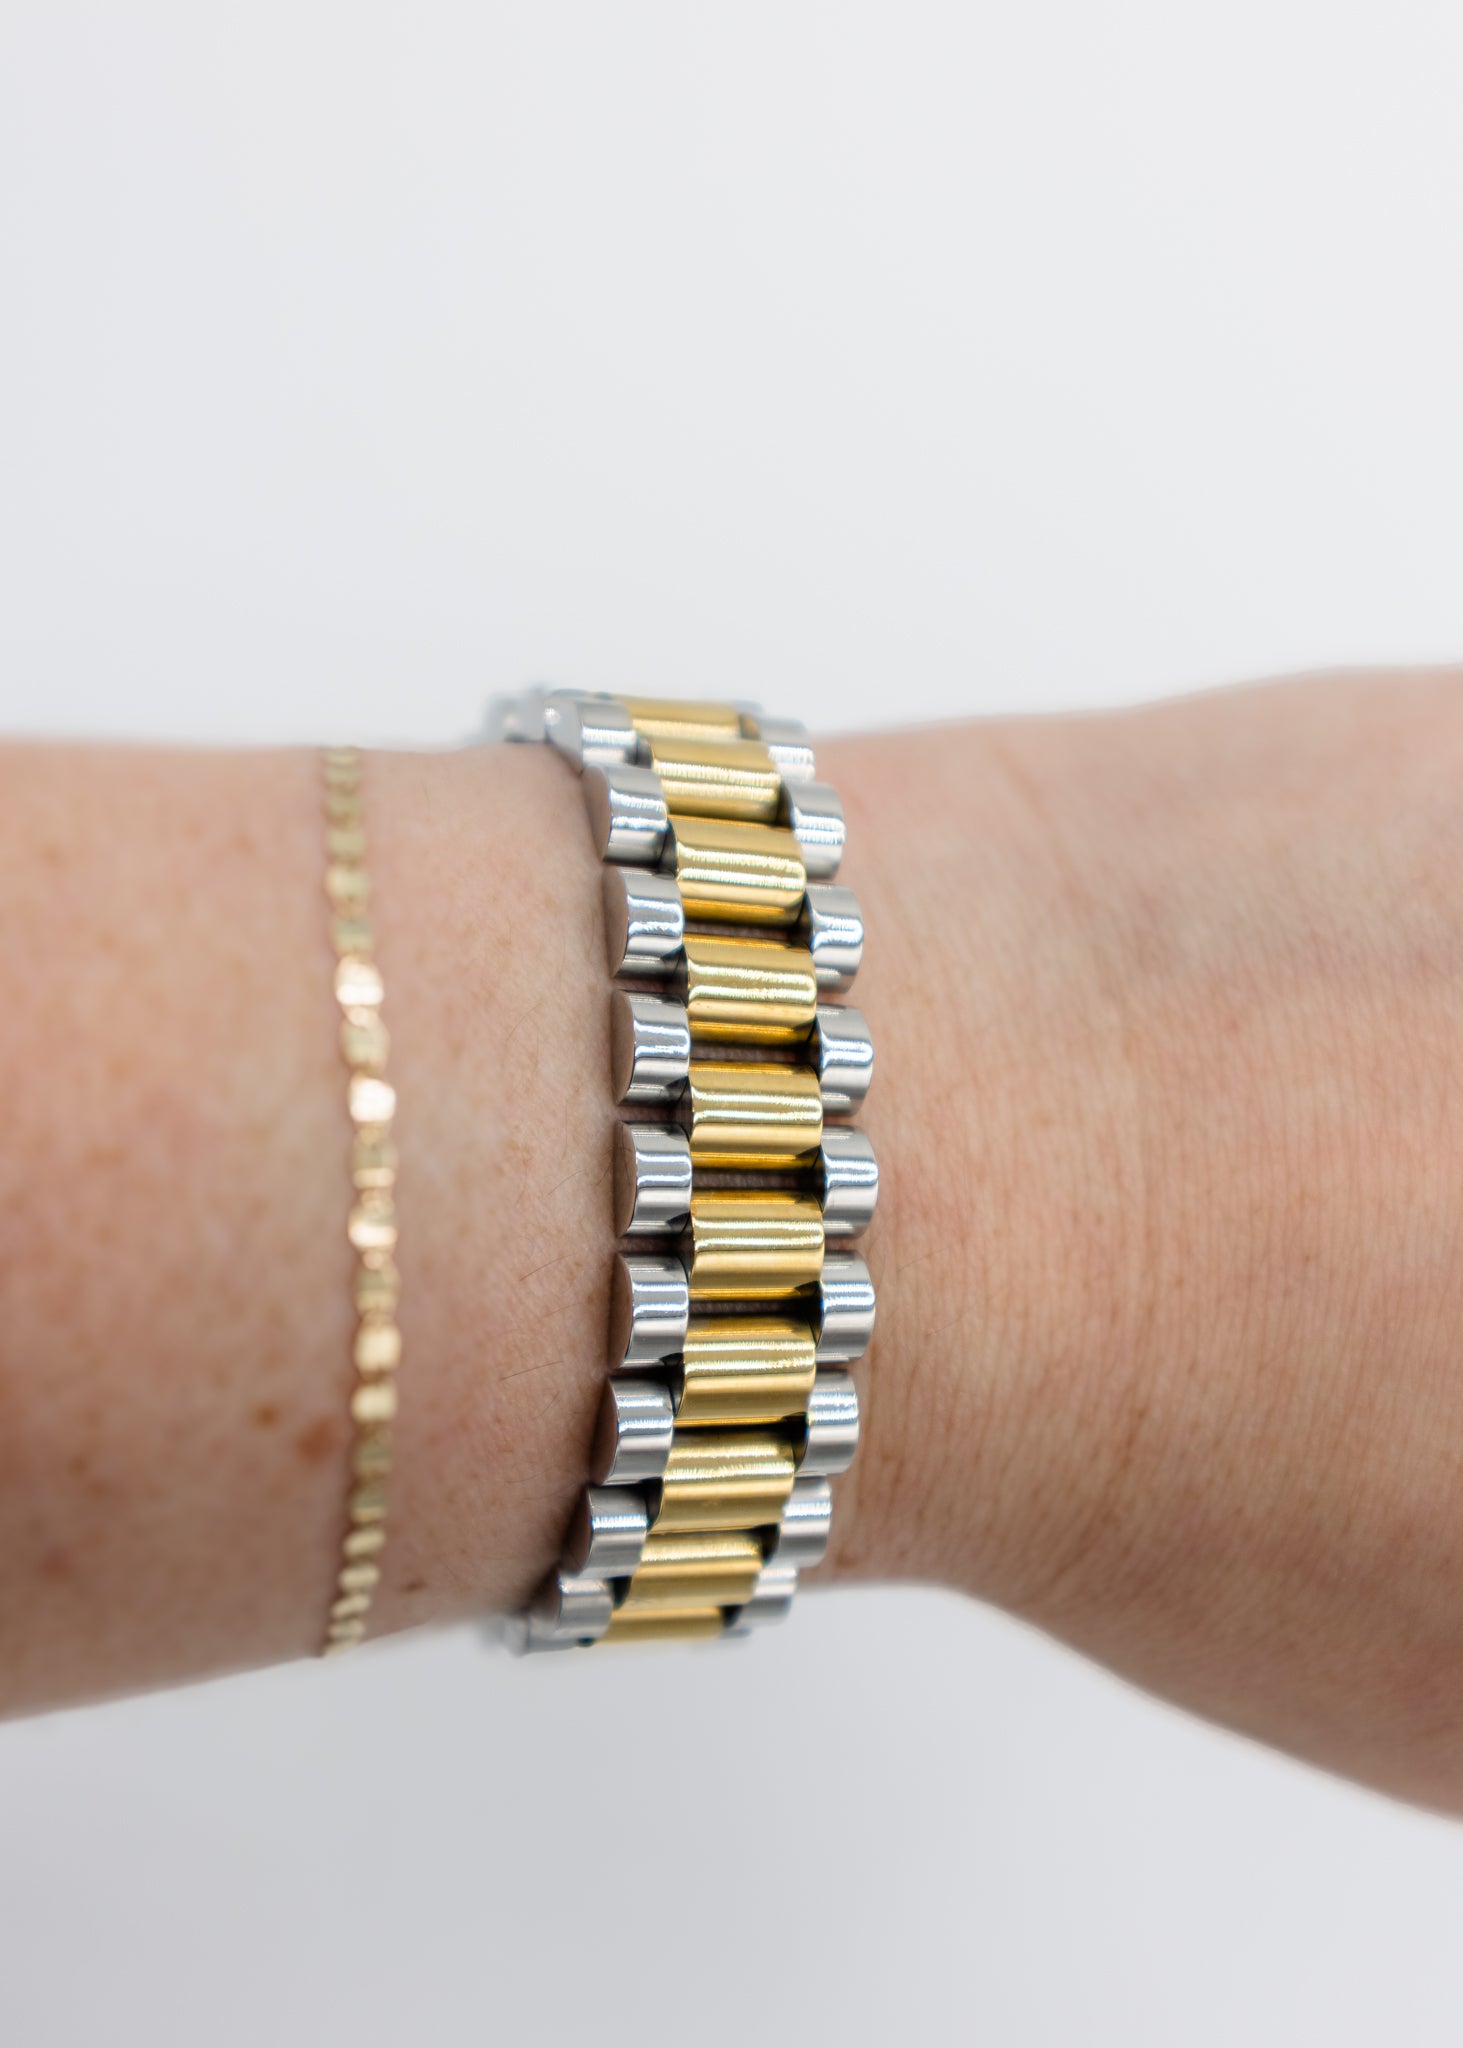 The XL Two-Toned Watch Band Bracelet